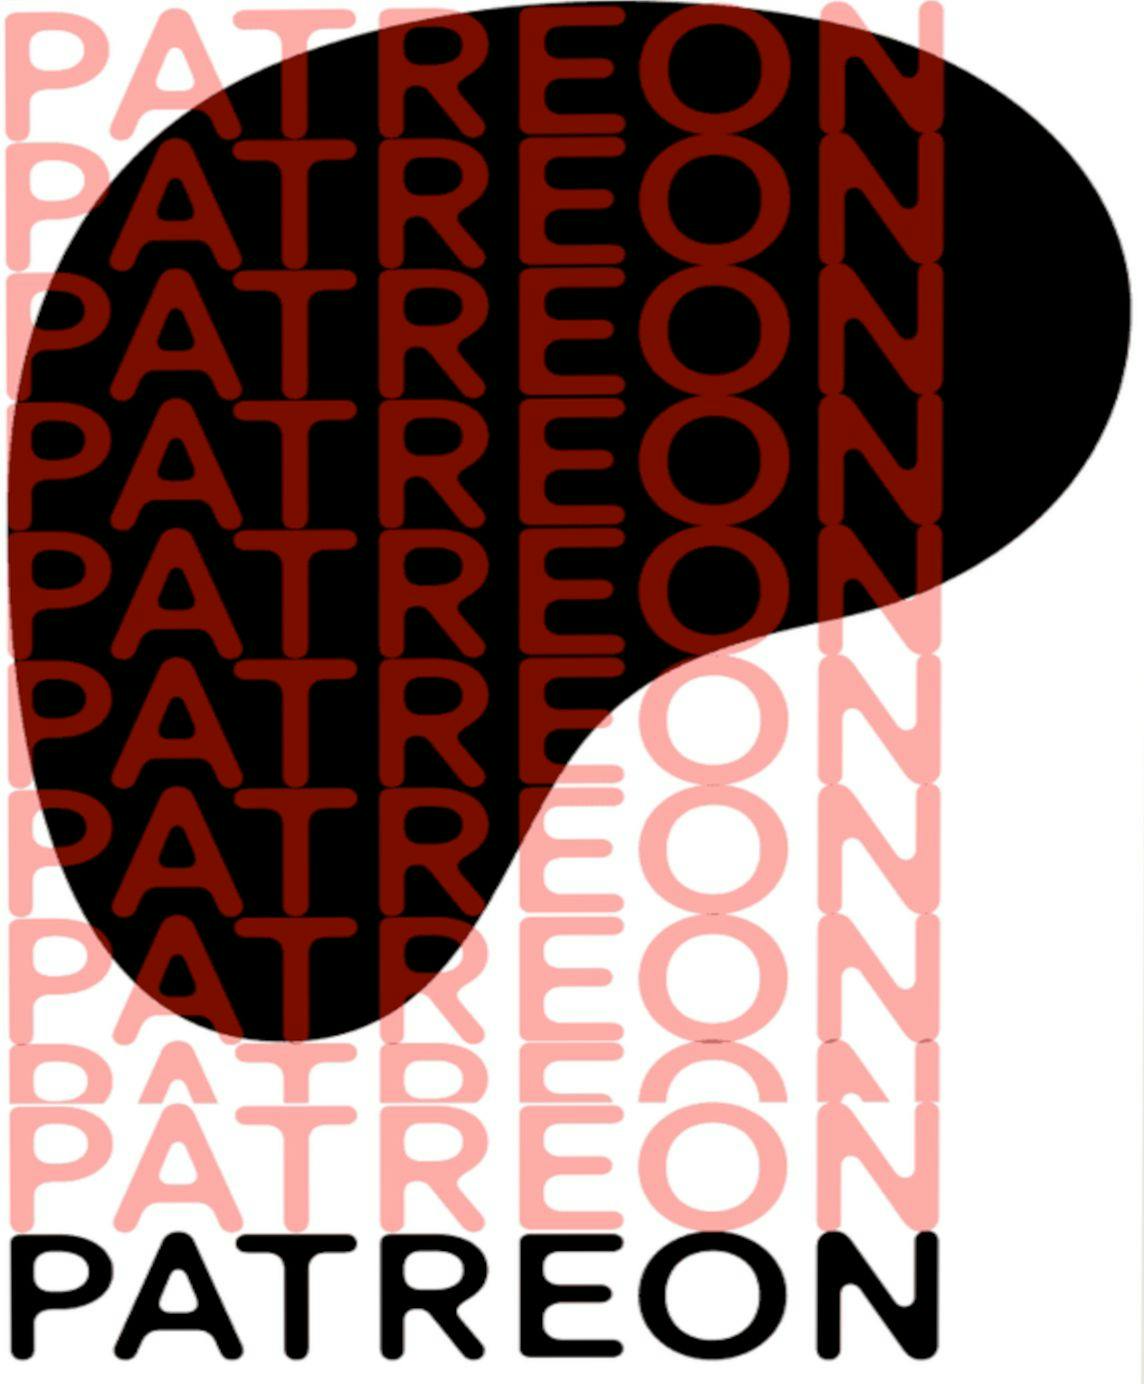 SUPPORT US ON PATREON